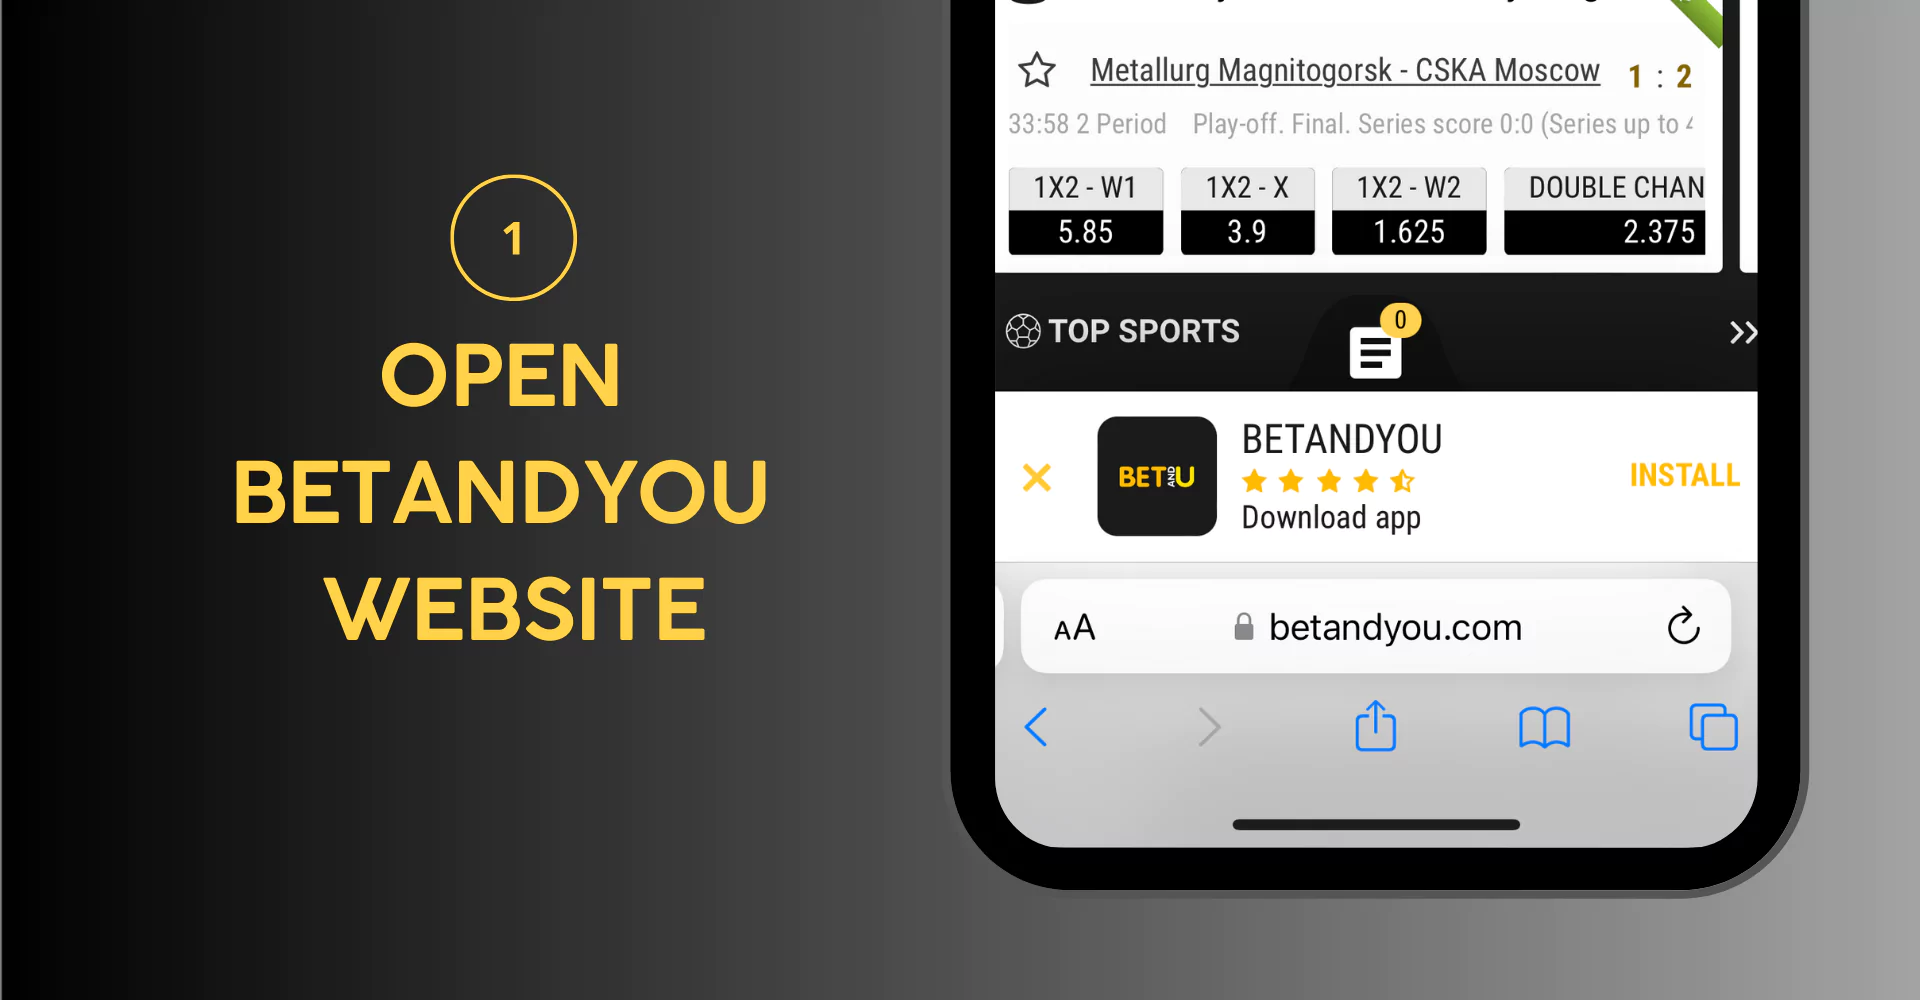 Go to the BetAndYou official website.